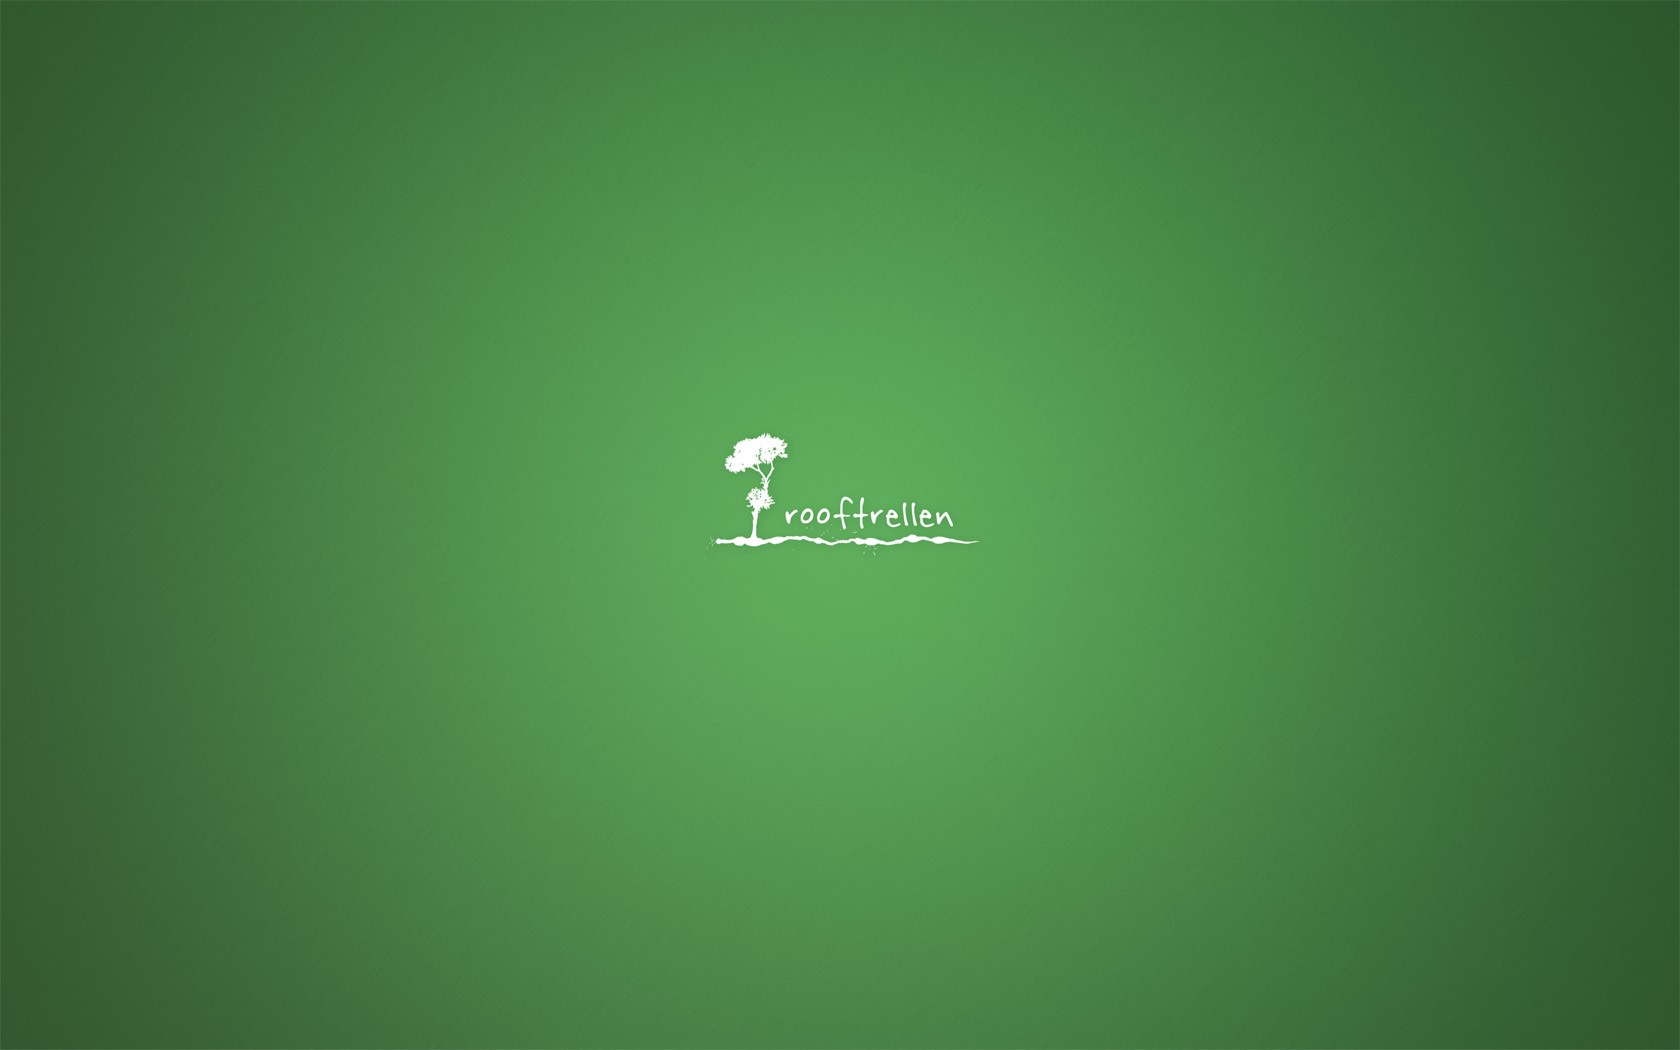 General 1680x1050 minimalism green background trees simple background